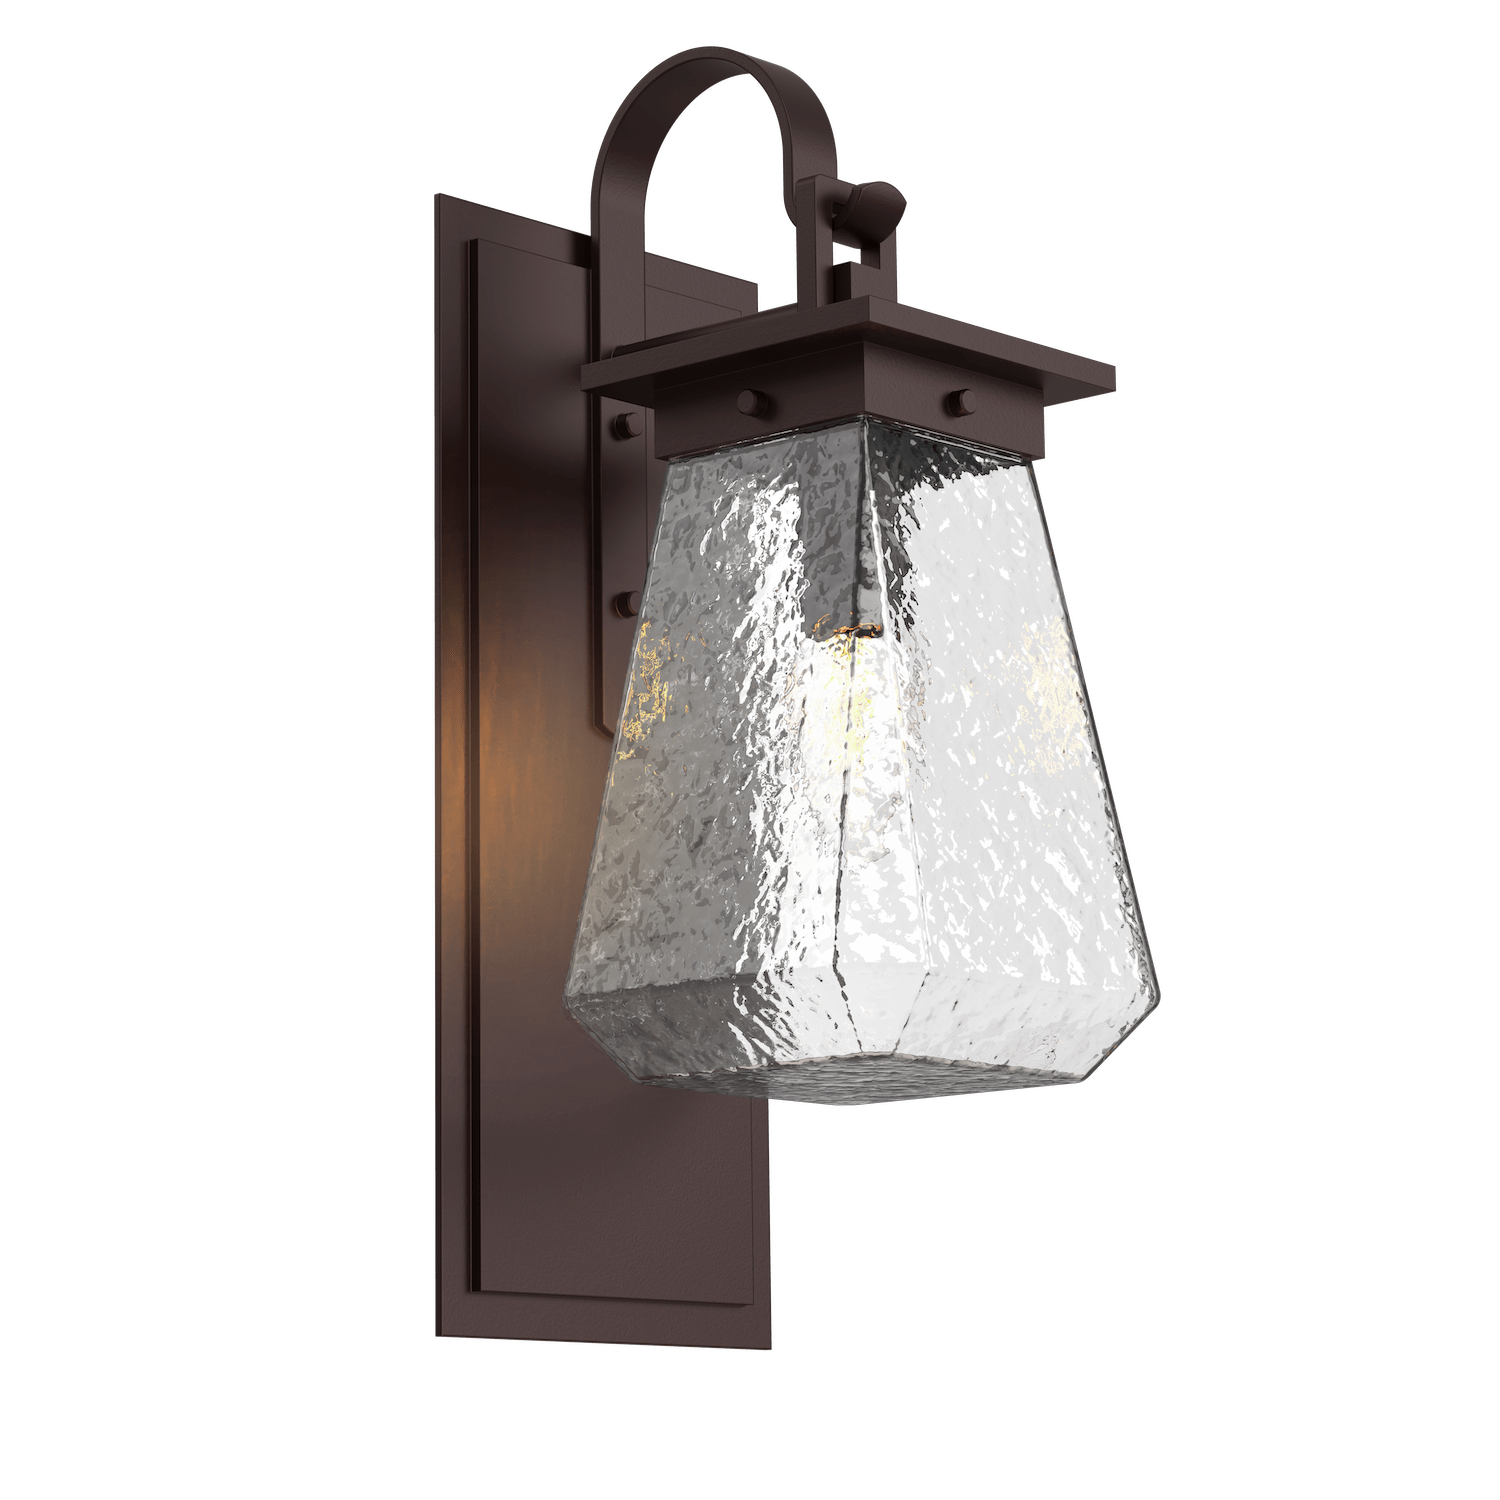 ODB0043-AC-SB-C-Hammerton-Studio-Beacon-18-inch-outdoor-sconce-with-shepherds-hook-with-statuary-bronze-finish-and-clear-blown-glass-shades-and-incandescent-lamping